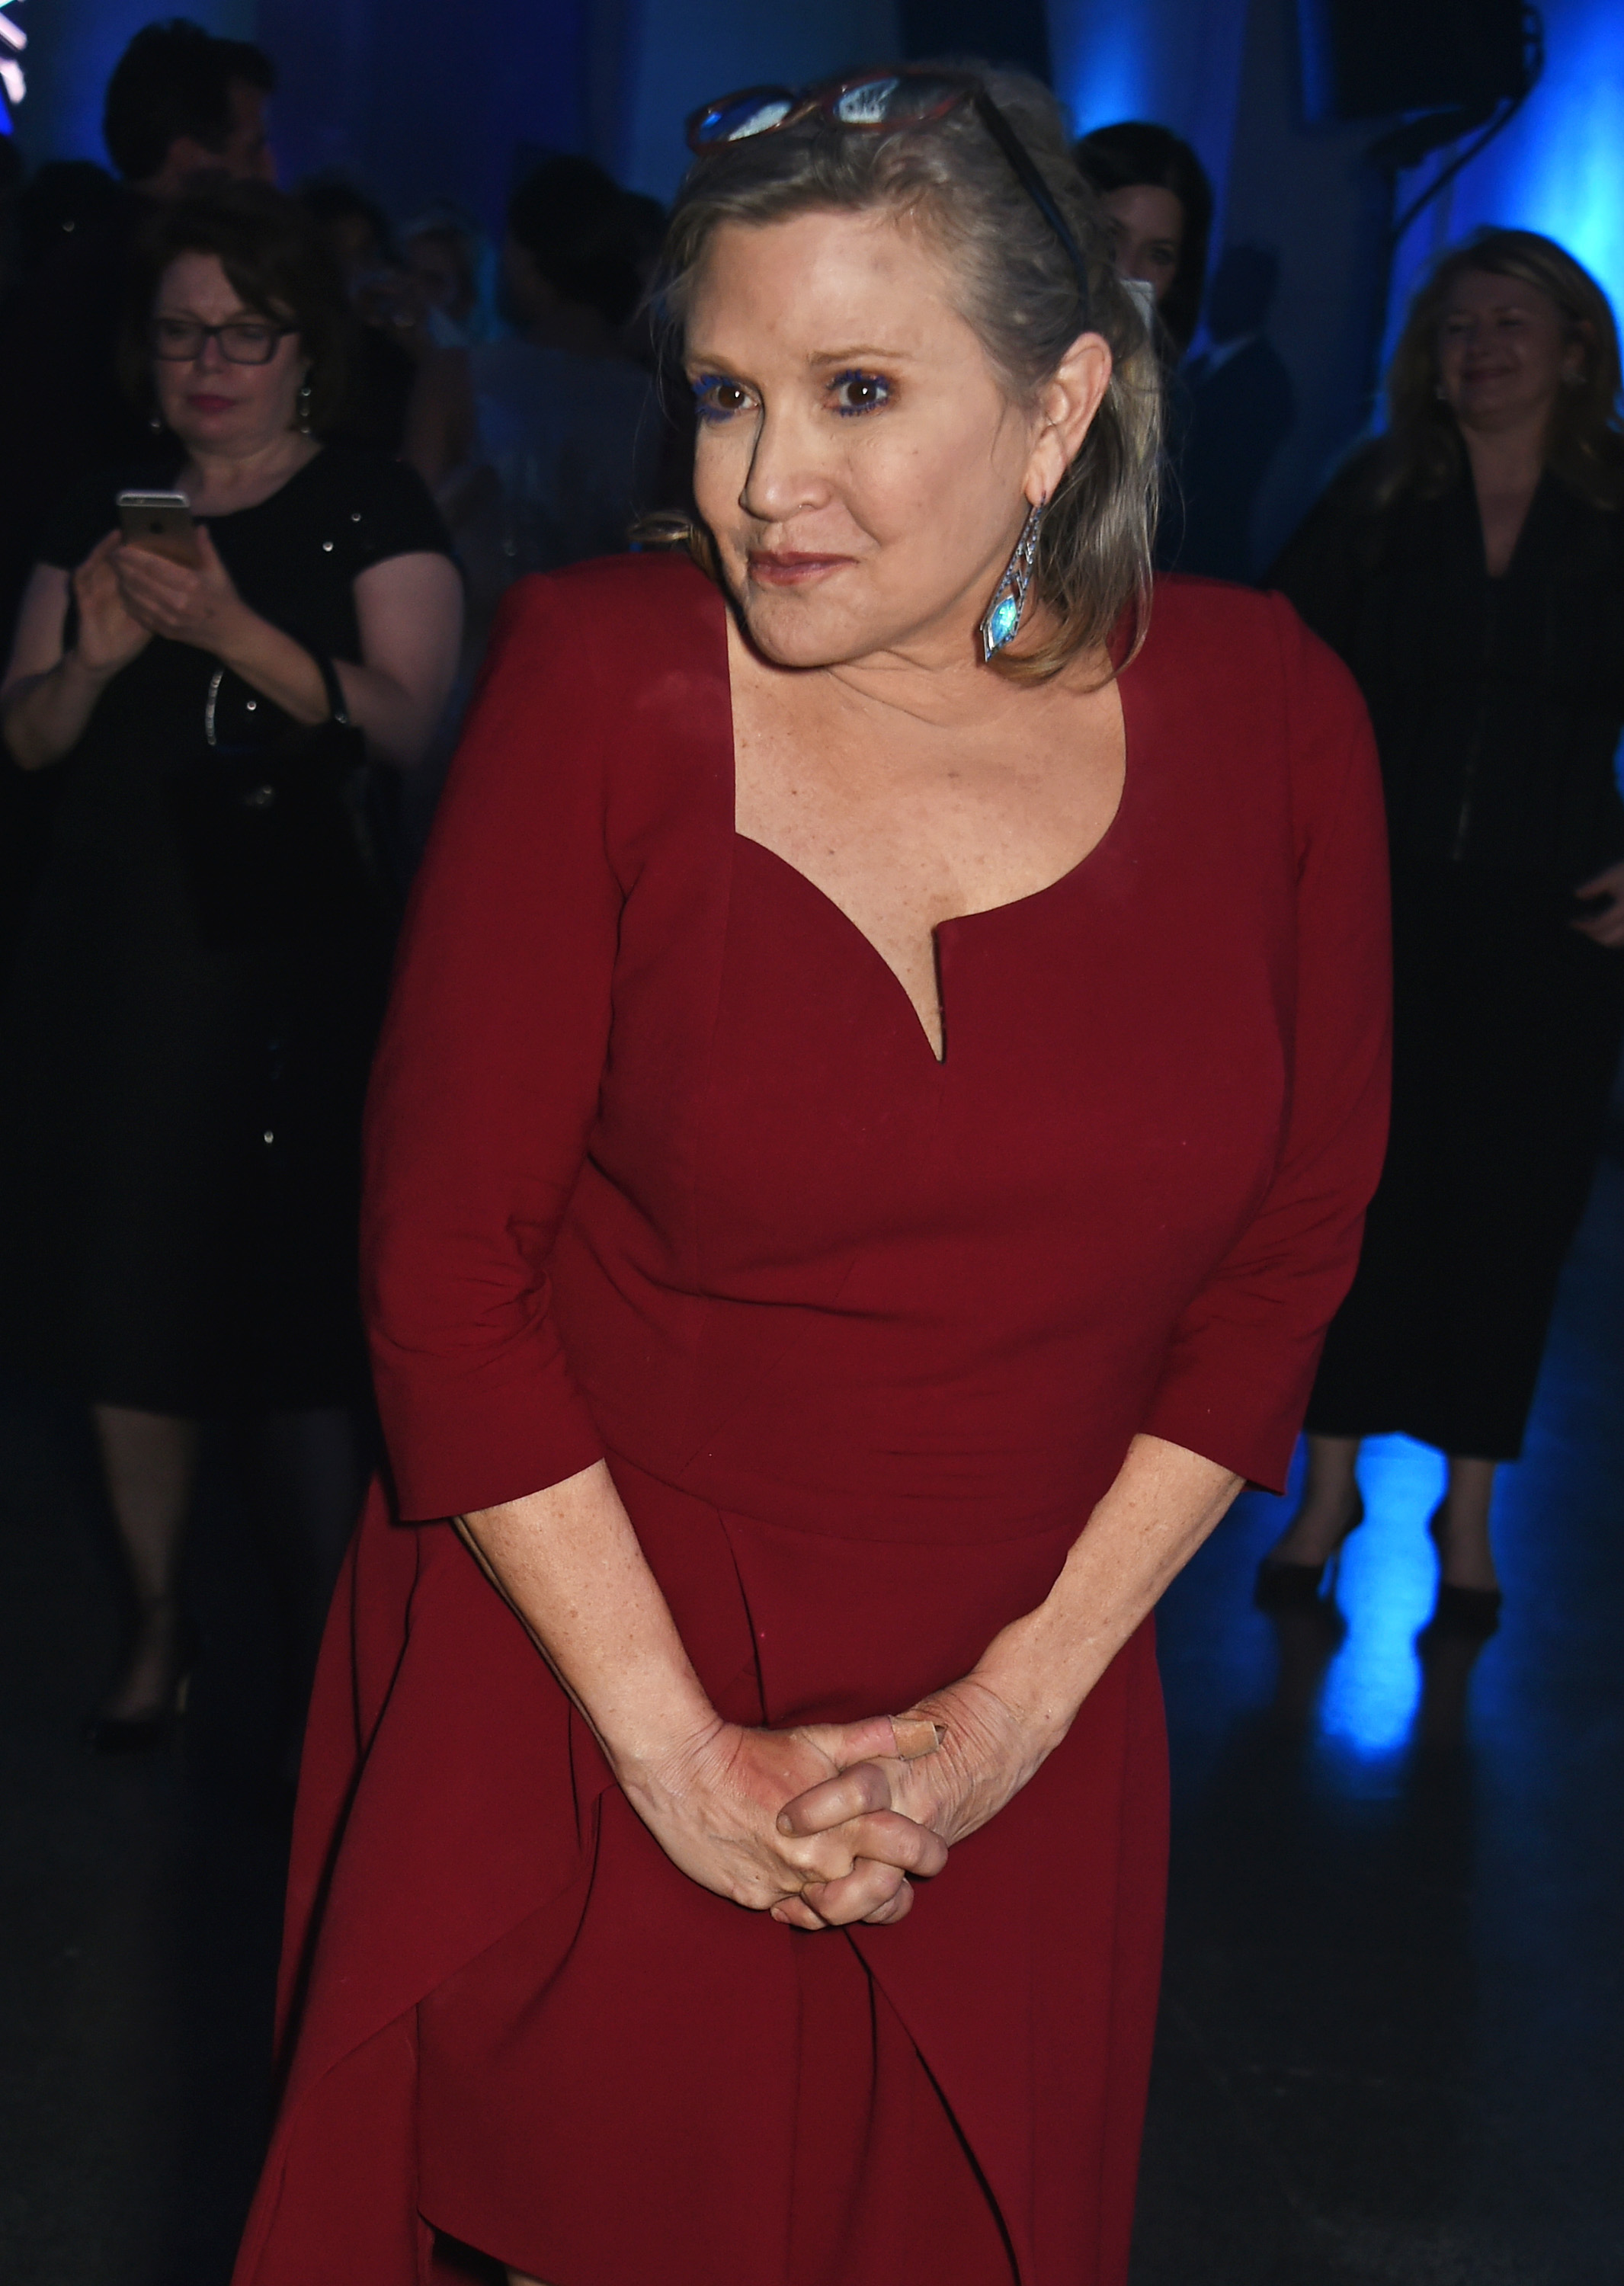 Carrie Fisher attends the after party following the European Premiere of "Star Wars: The Force Awakens" in London, England, on December 16, 2015. | Source: Getty Images